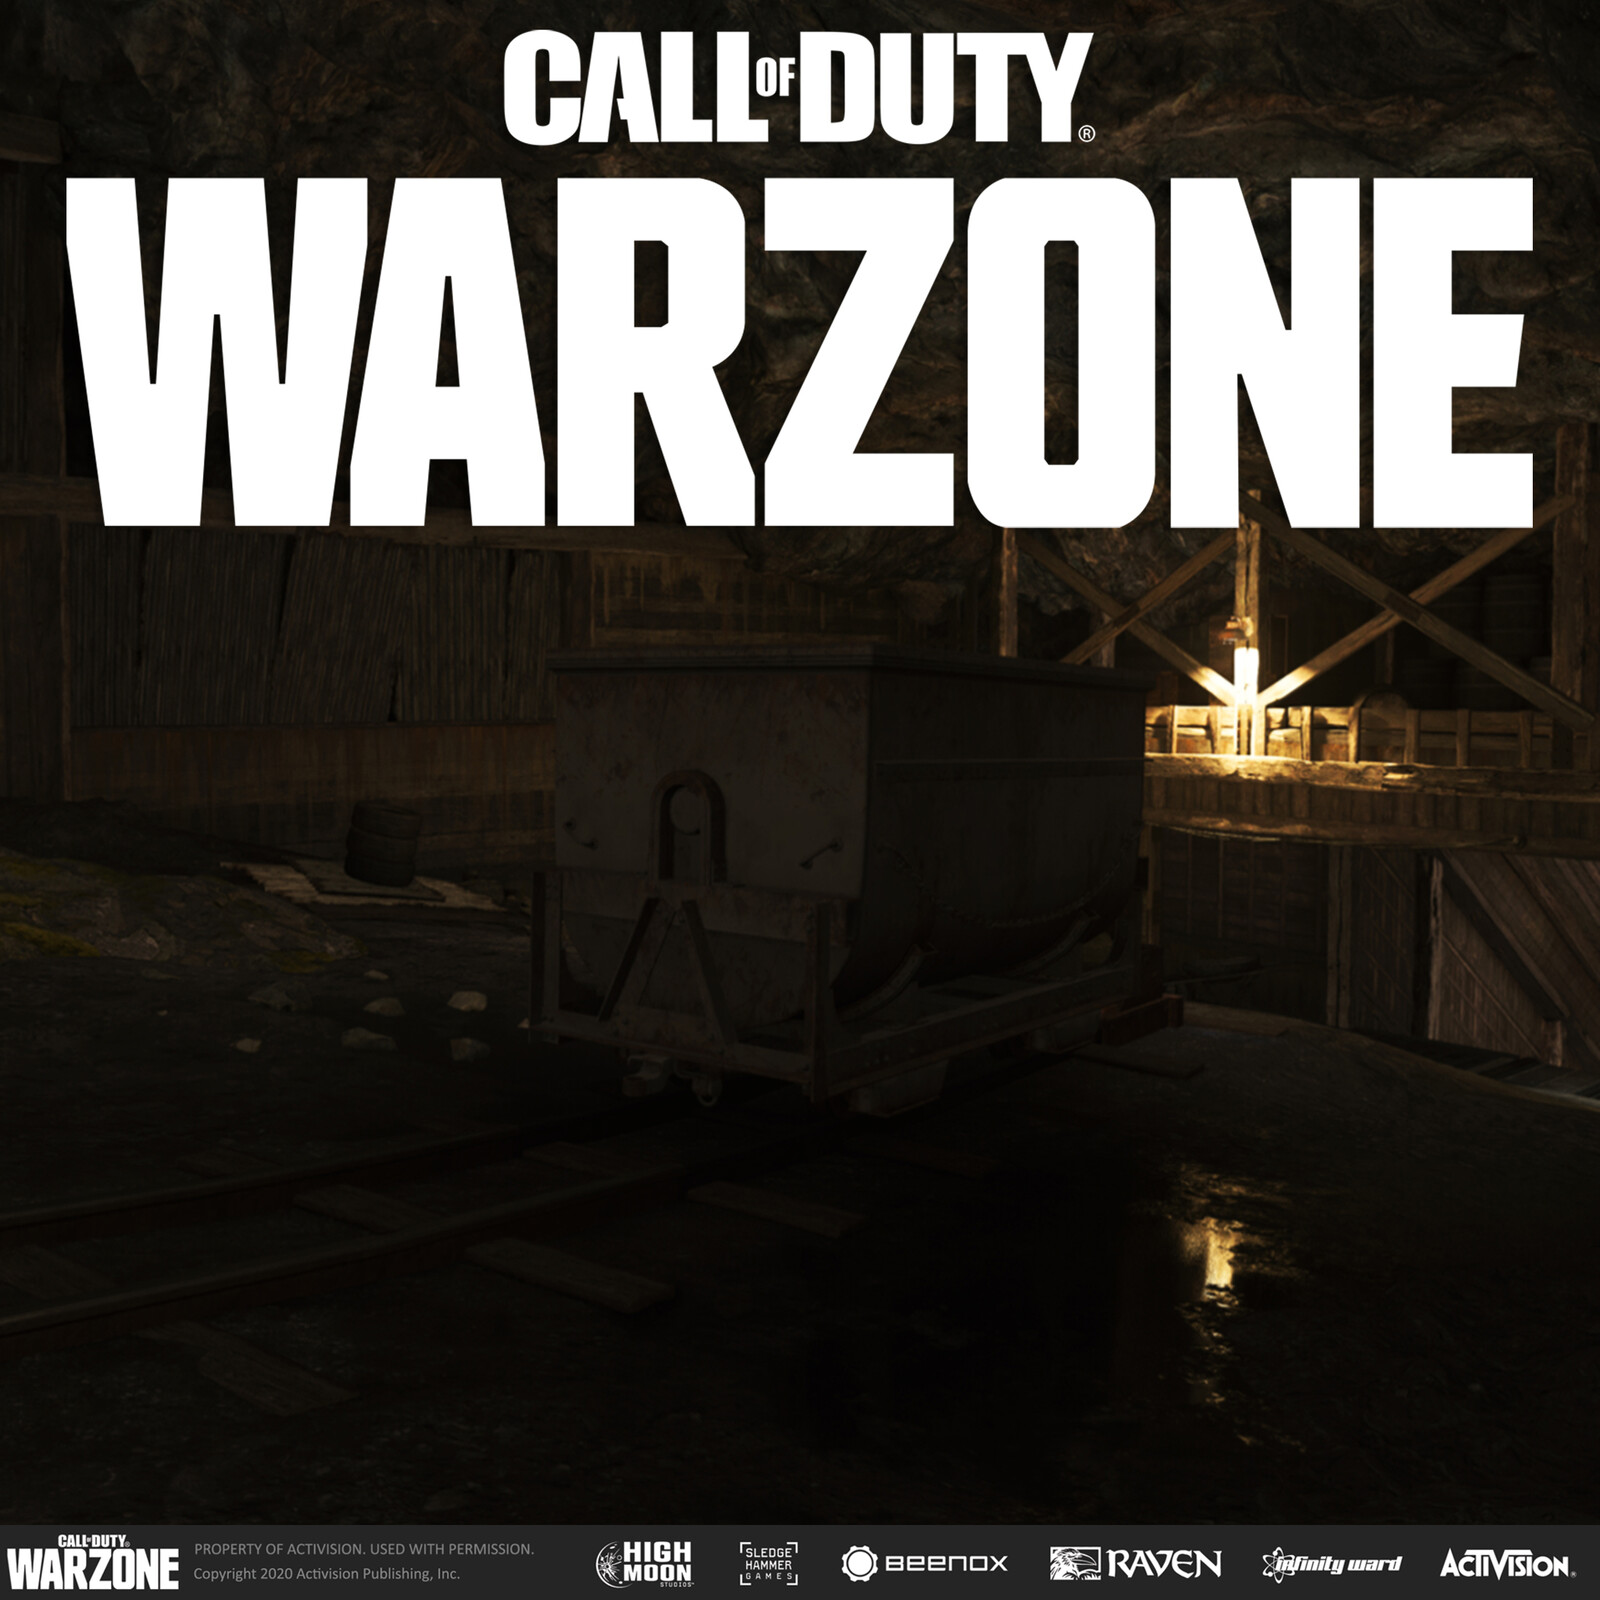 Call Of Duty: Vanguard Warzone - Mines, Tunnels - 3